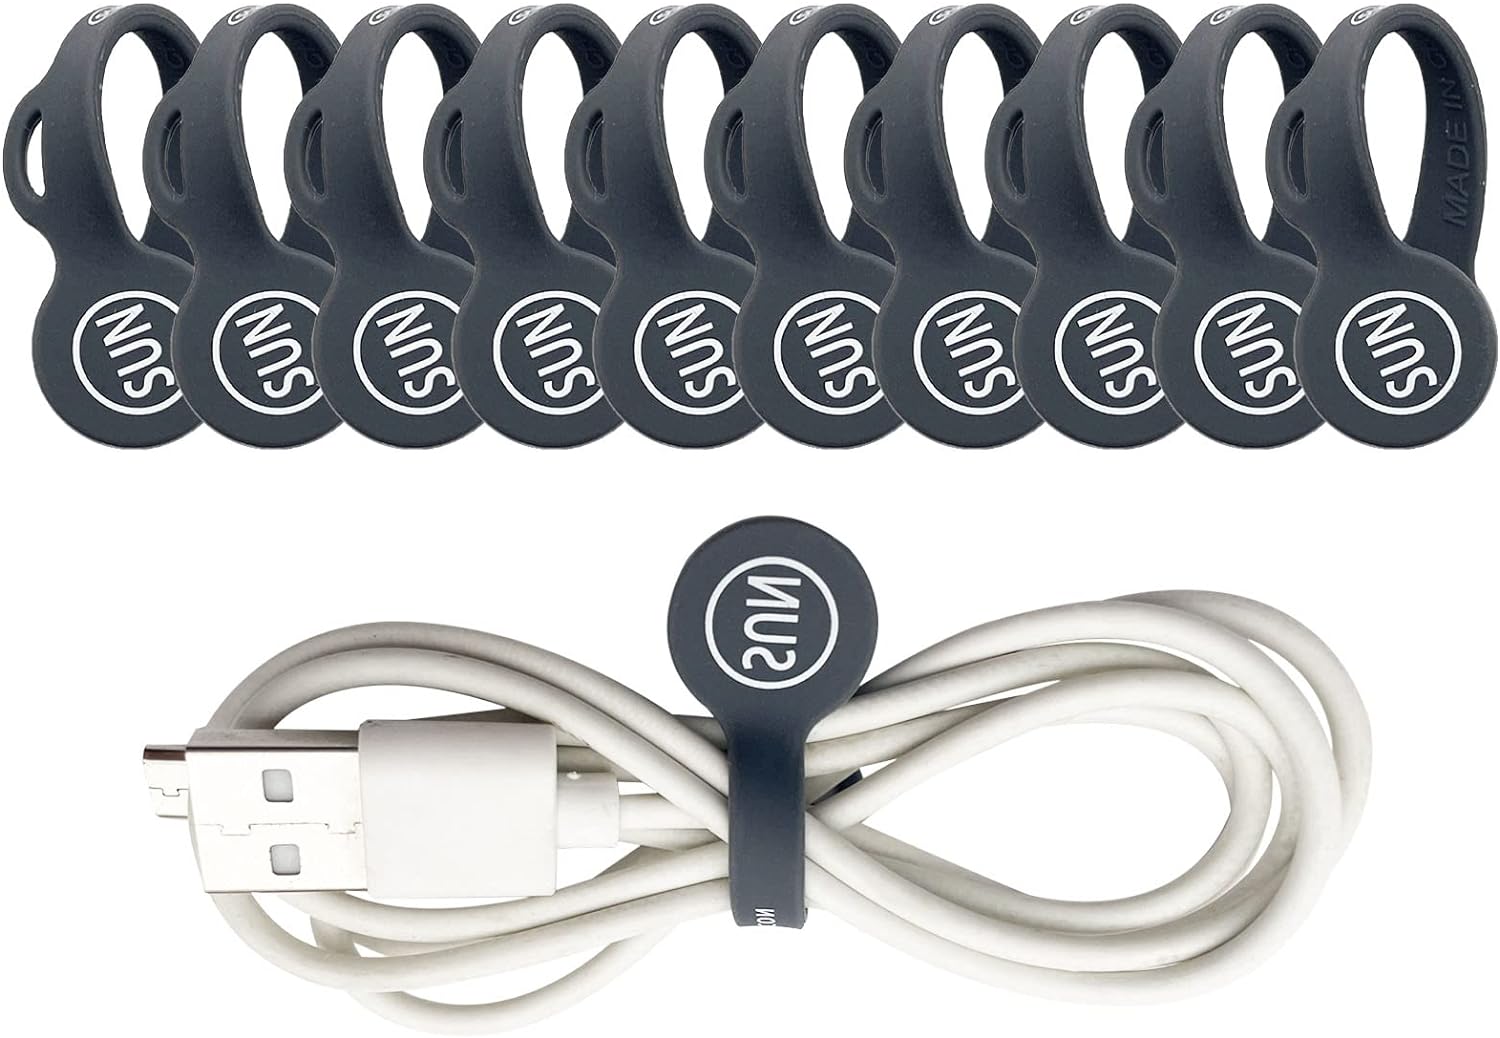 SUNFICON 10 Pack Magnetic Cable Clips Cable Organizers Gray Earbuds Cords Clips Bookmark Whiteboard Noticeboard Fridge Magnets USB Cable Managers Keepers Ties Straps for Home Kitchen,Office,School